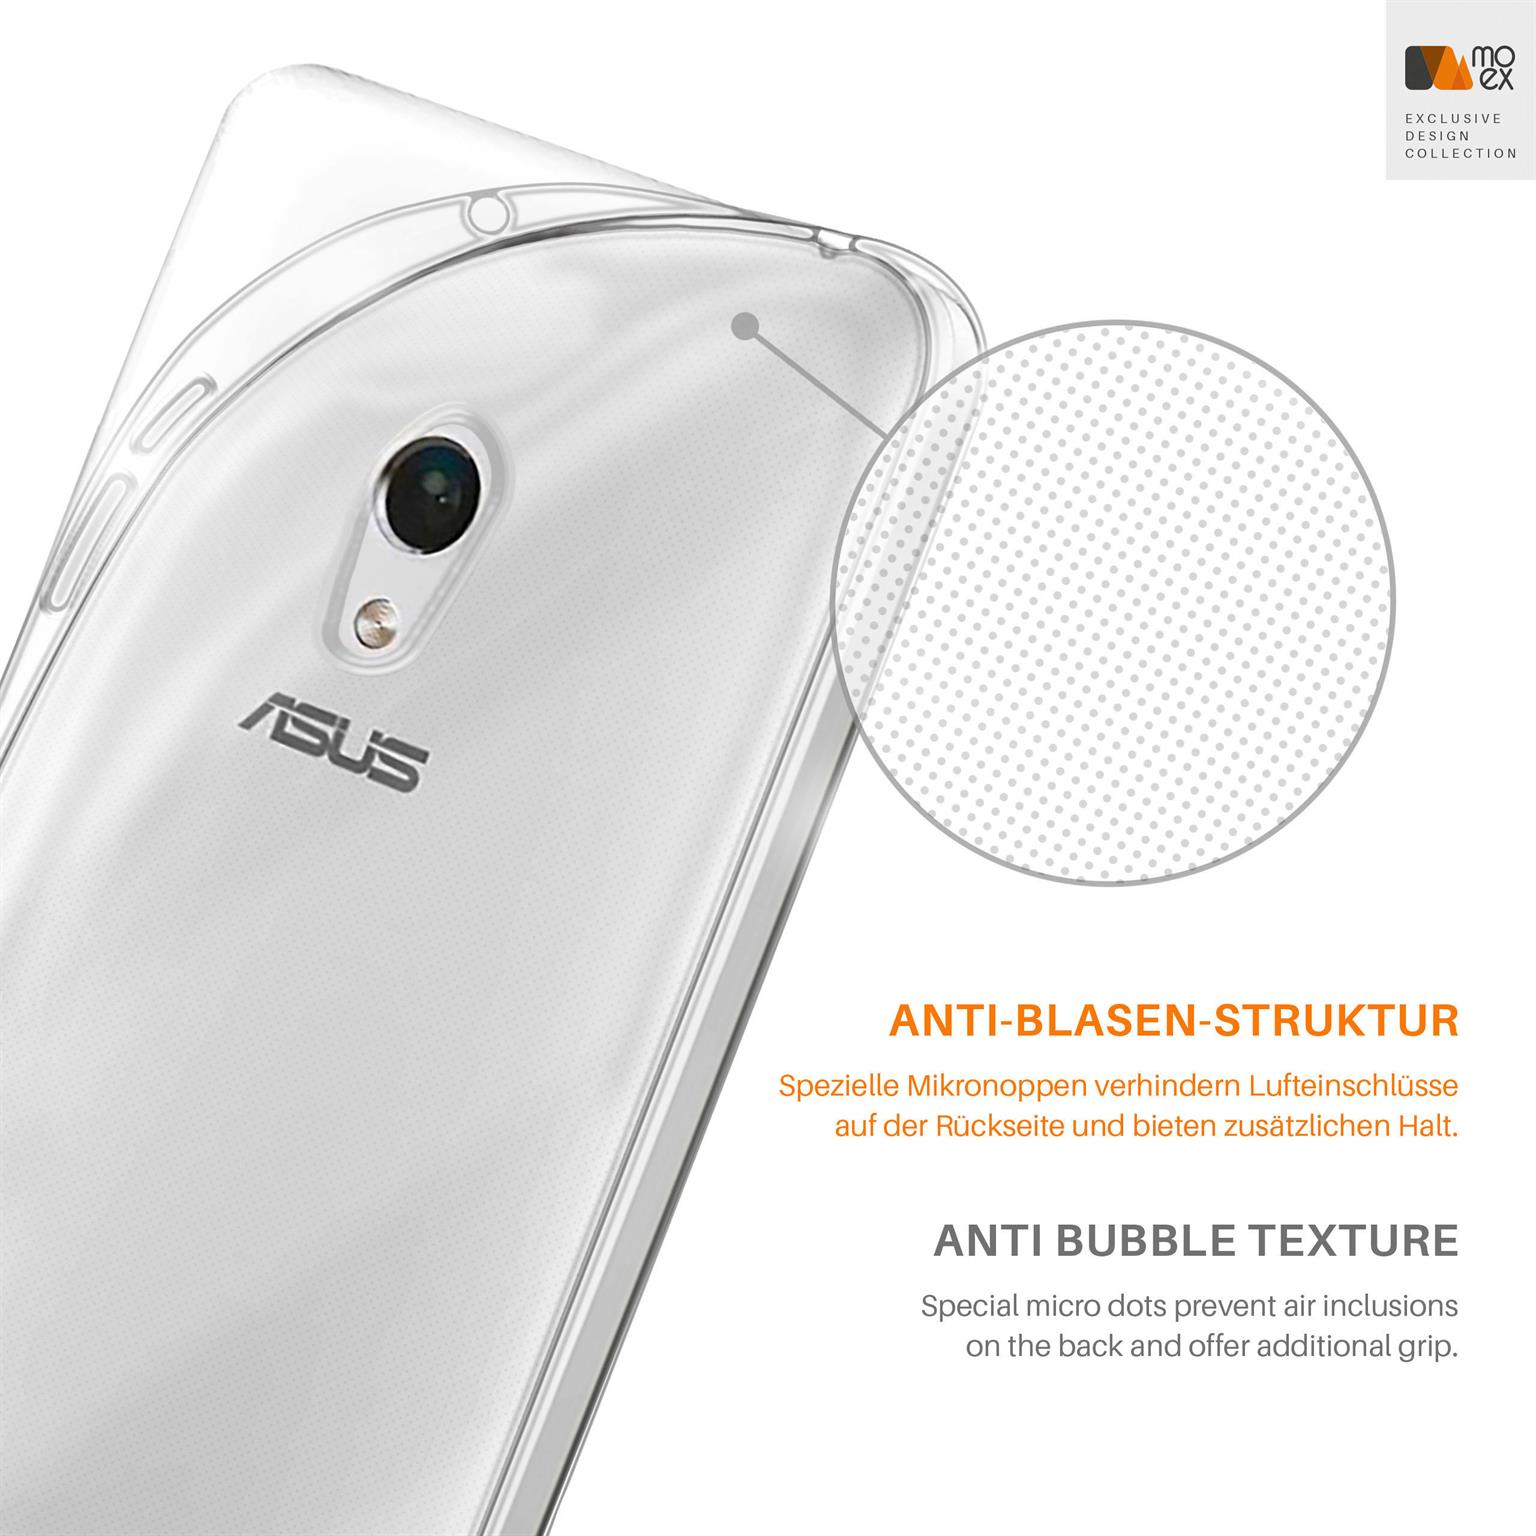 (2014), 5 Aero Backcover, ASUS, MOEX Zenfone Asus Crystal-Clear Case,